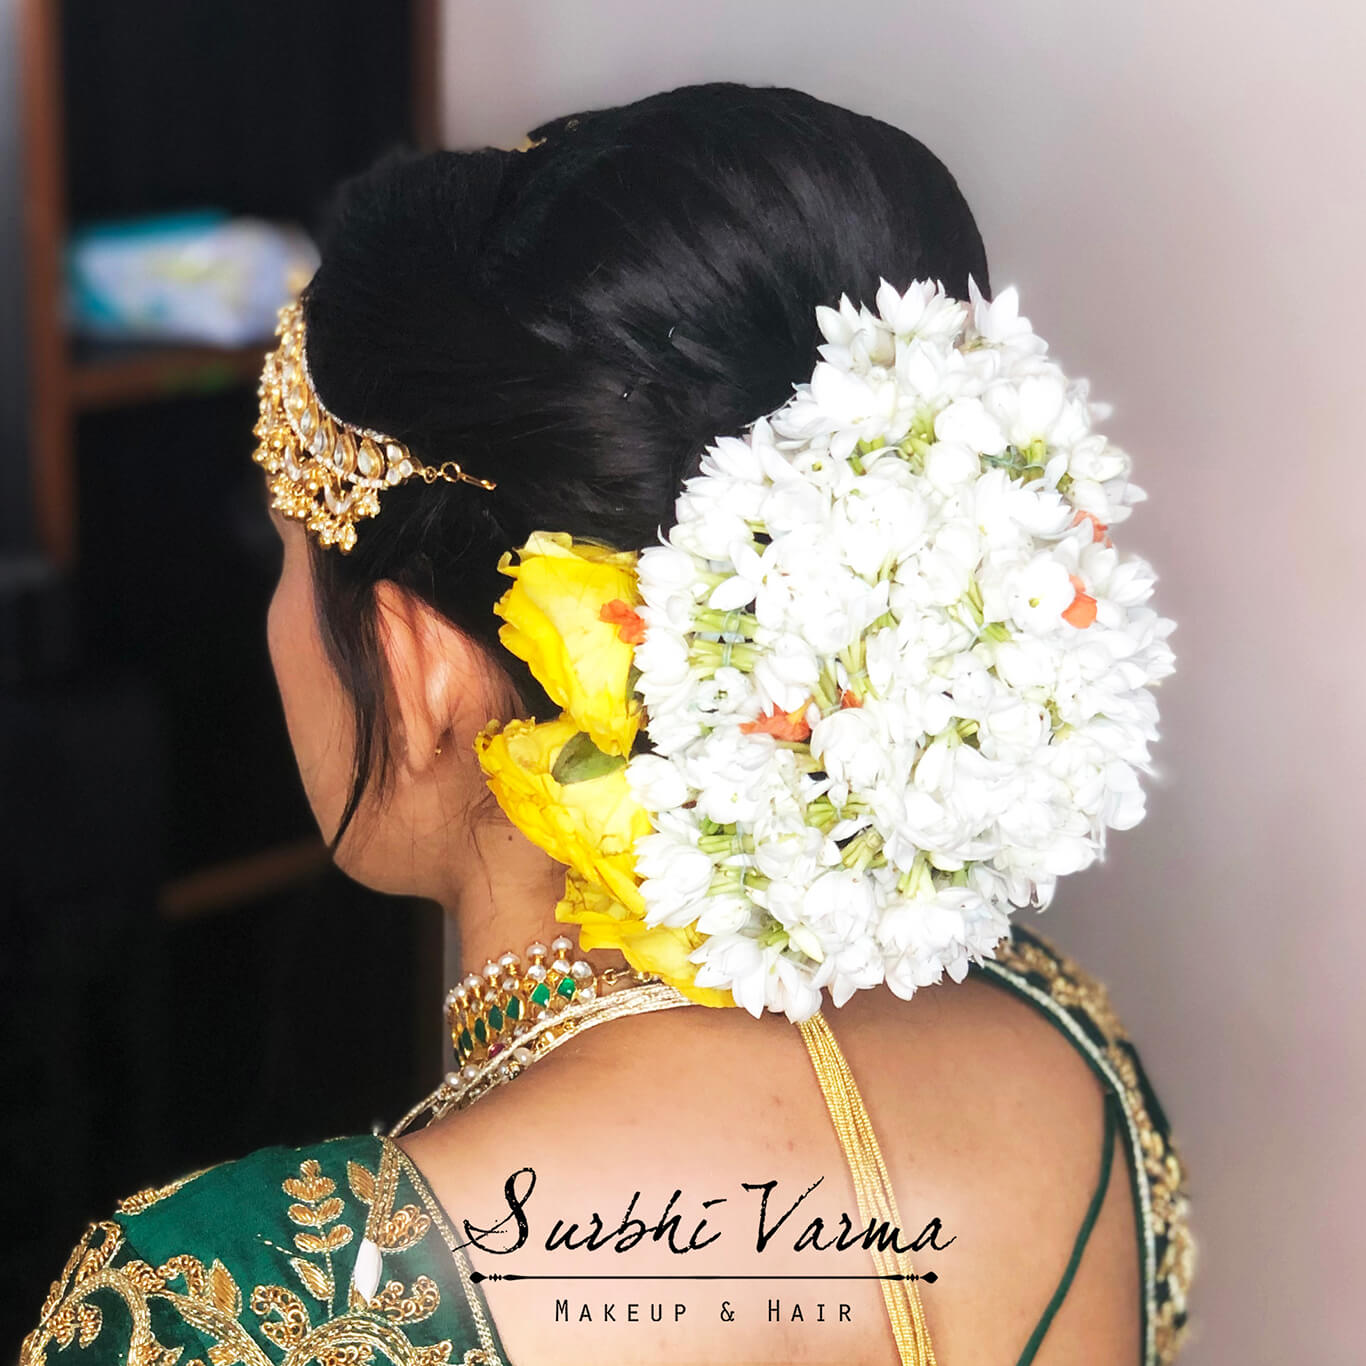 30 Stunning Wedding Hairstyles With Flowers In 2021